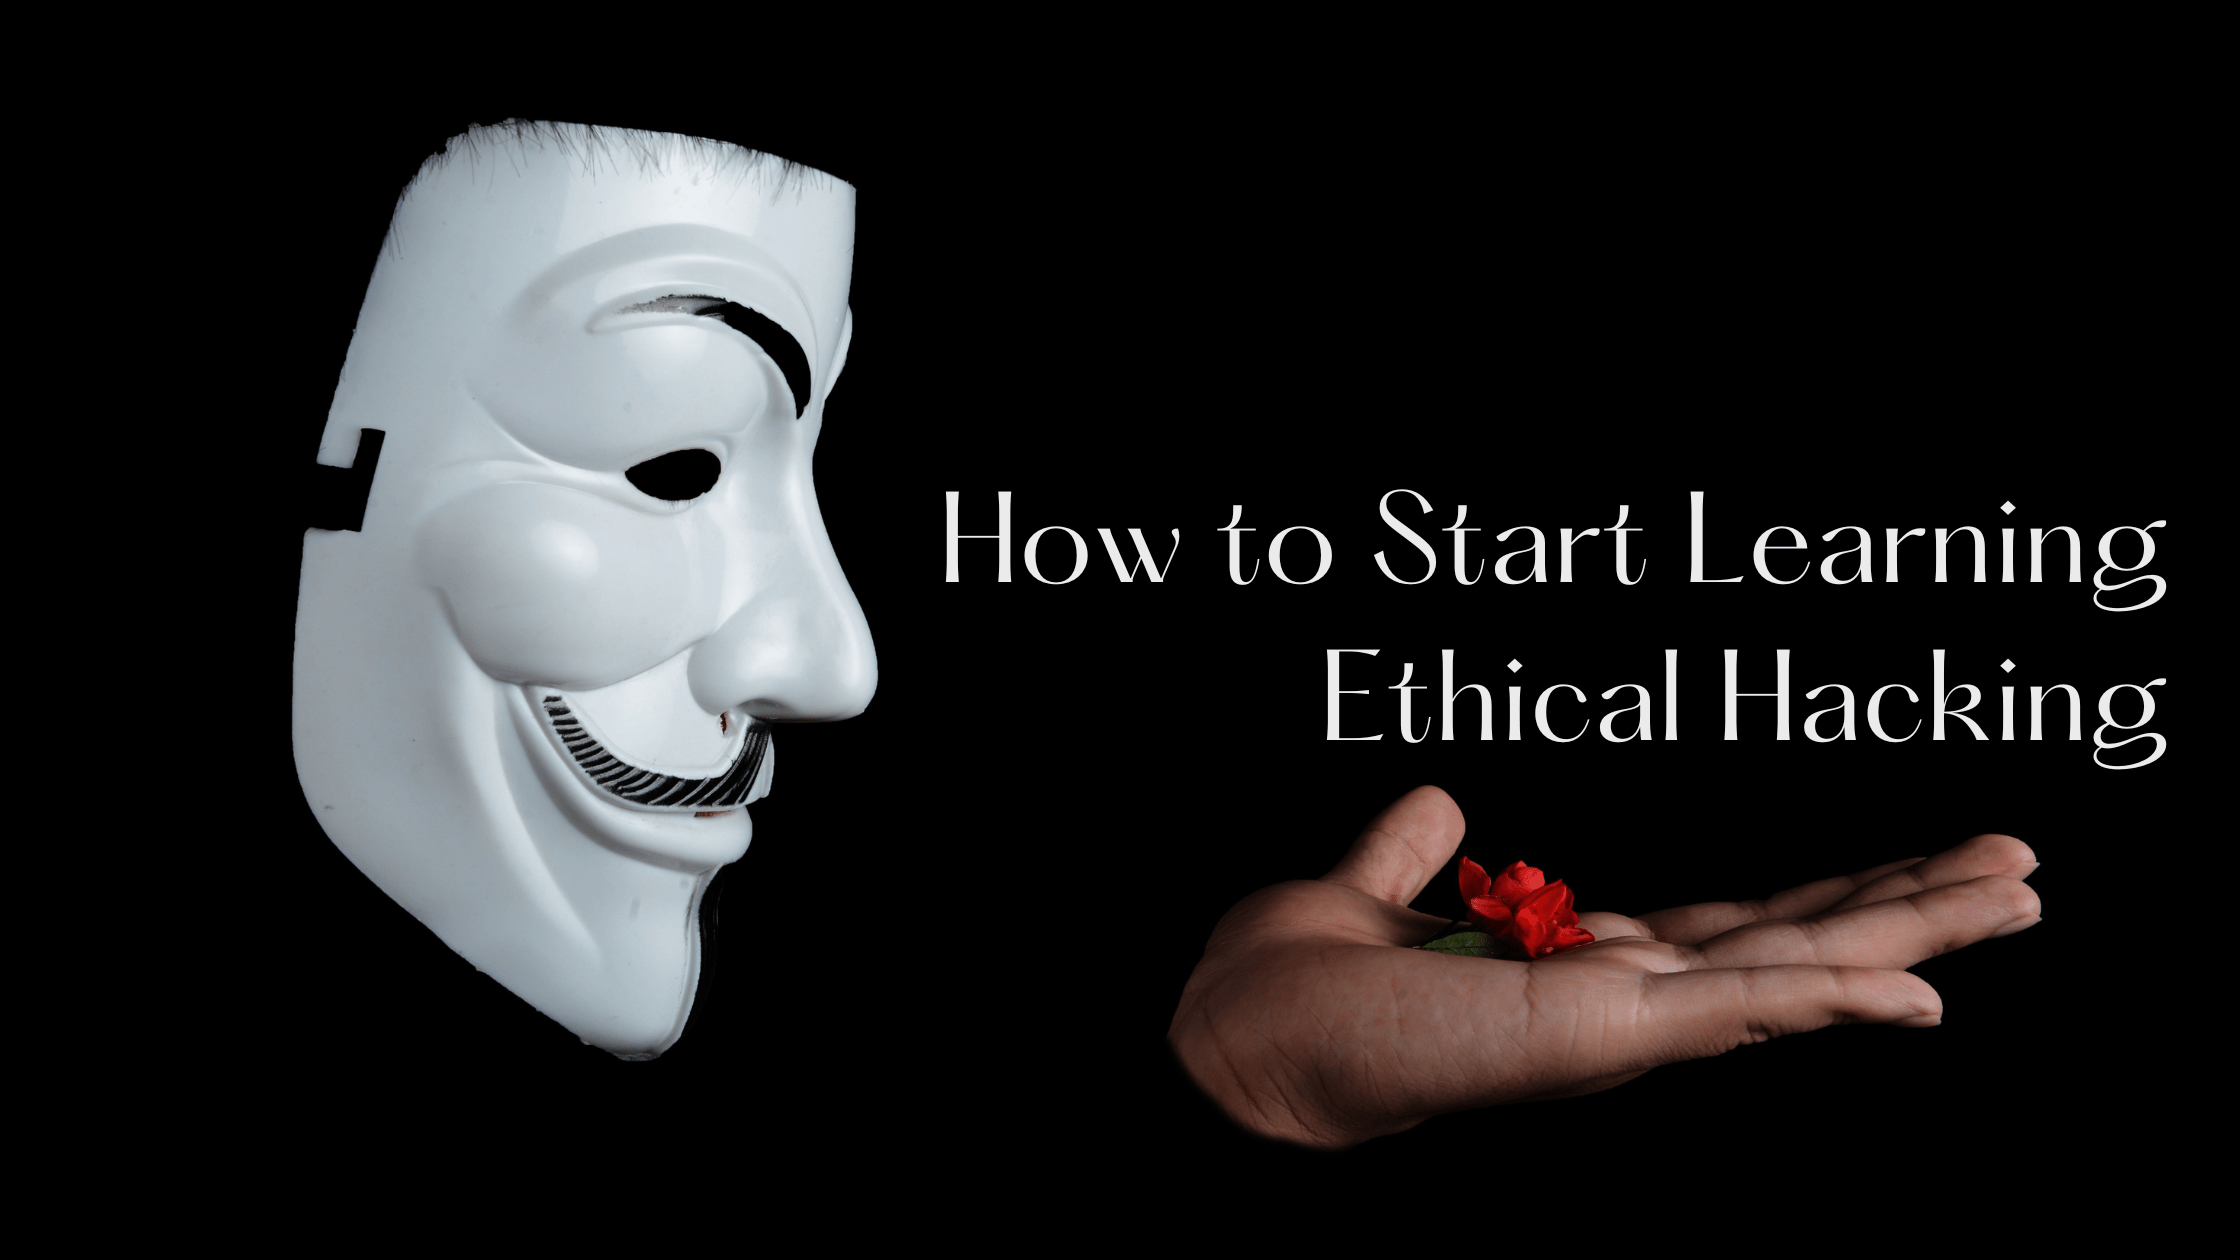 How to Start Learning Ethical Hacking - Hacking Beginners Guide